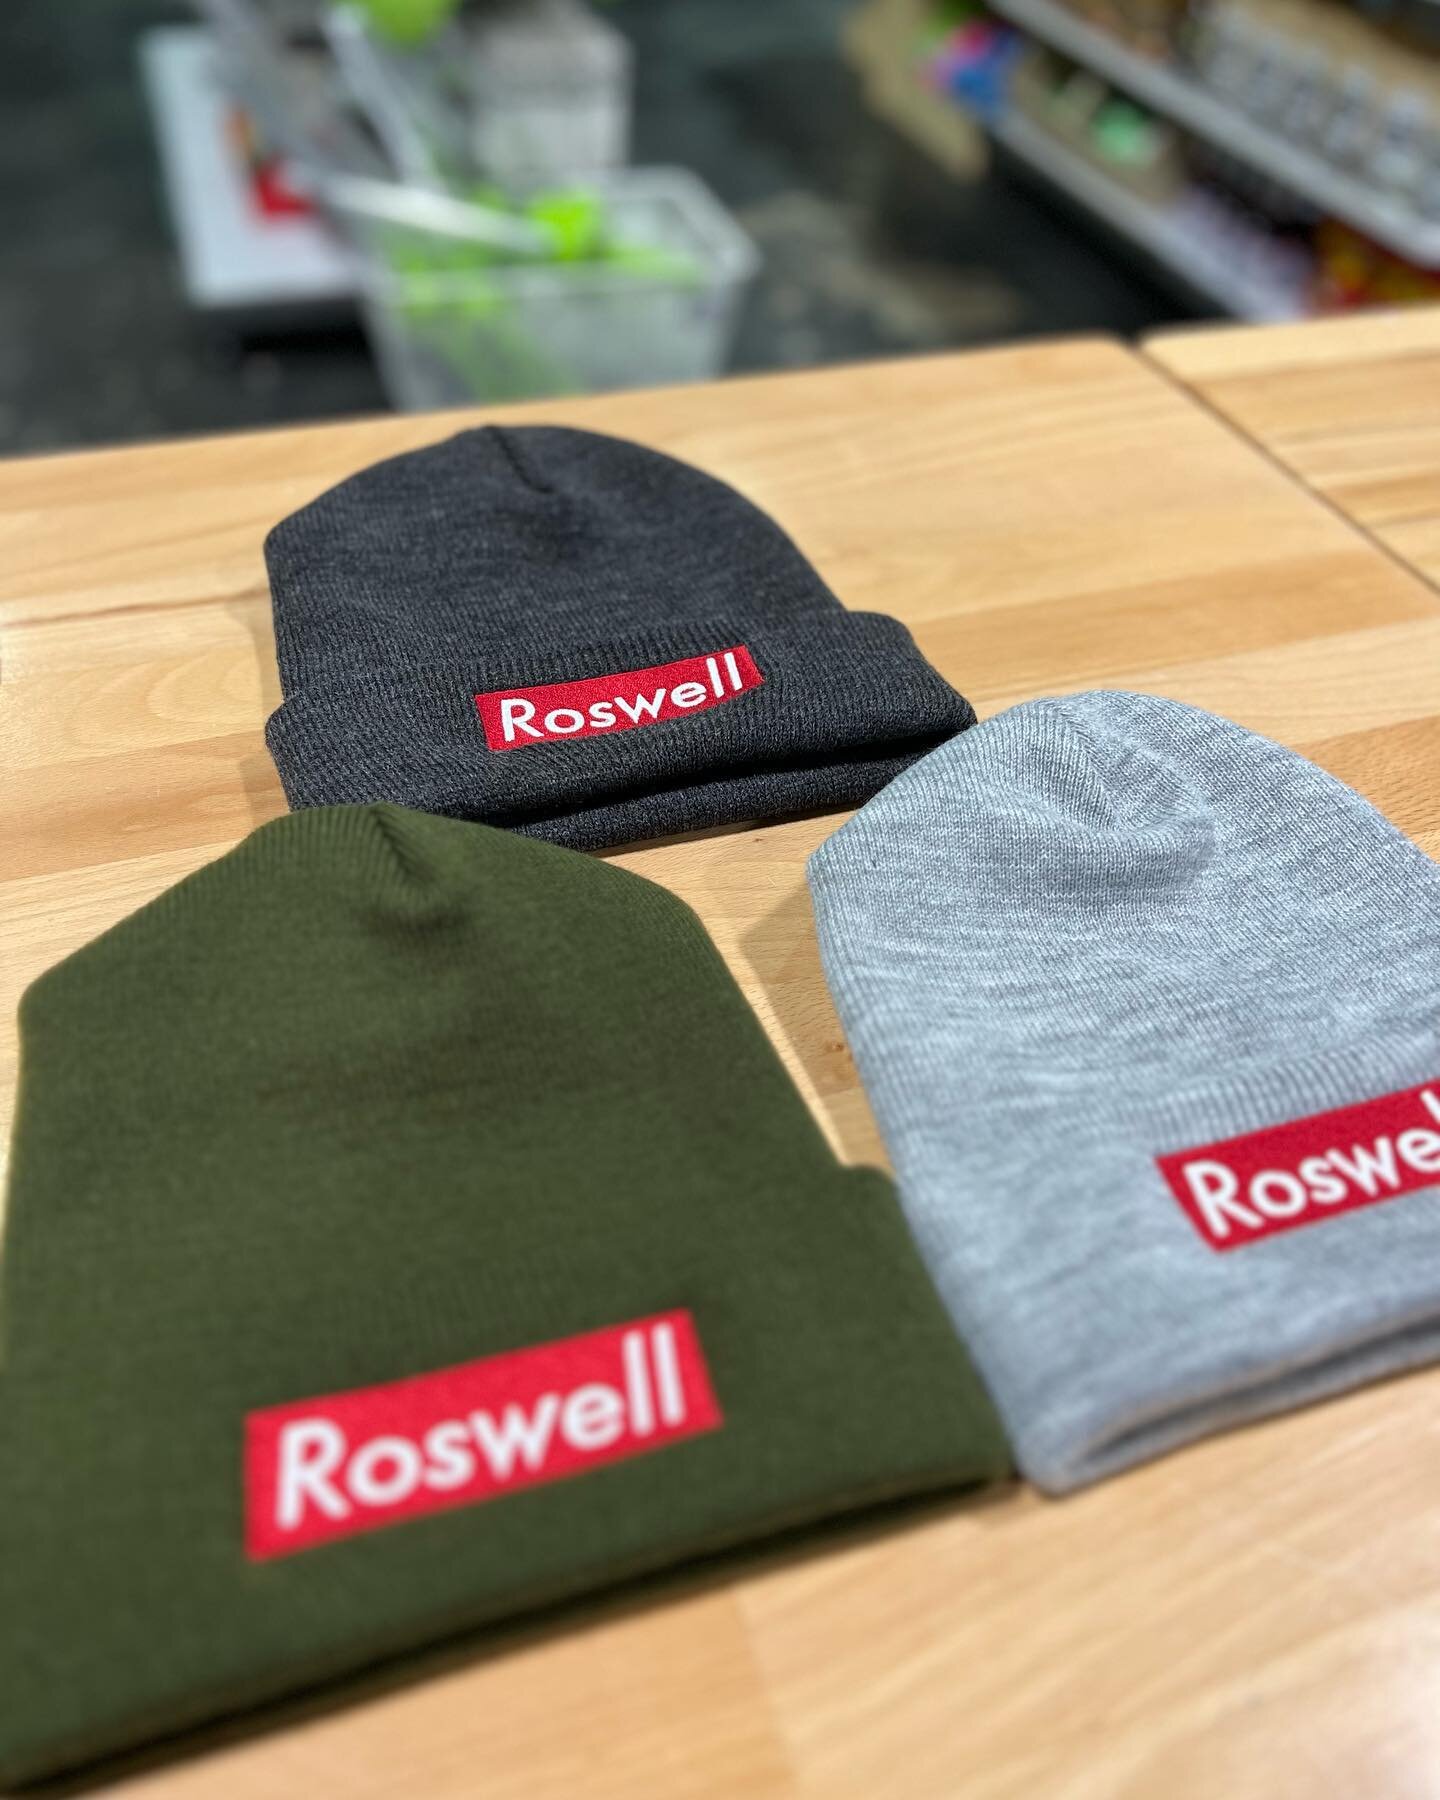 Roswell beanies available at the shop now!
.
.
#moonmanprinting #downtownroswell #mainstreetroswell #roswellnm #roswellnewmexico #roswelliscool #beanies #itsstillbeanieseason